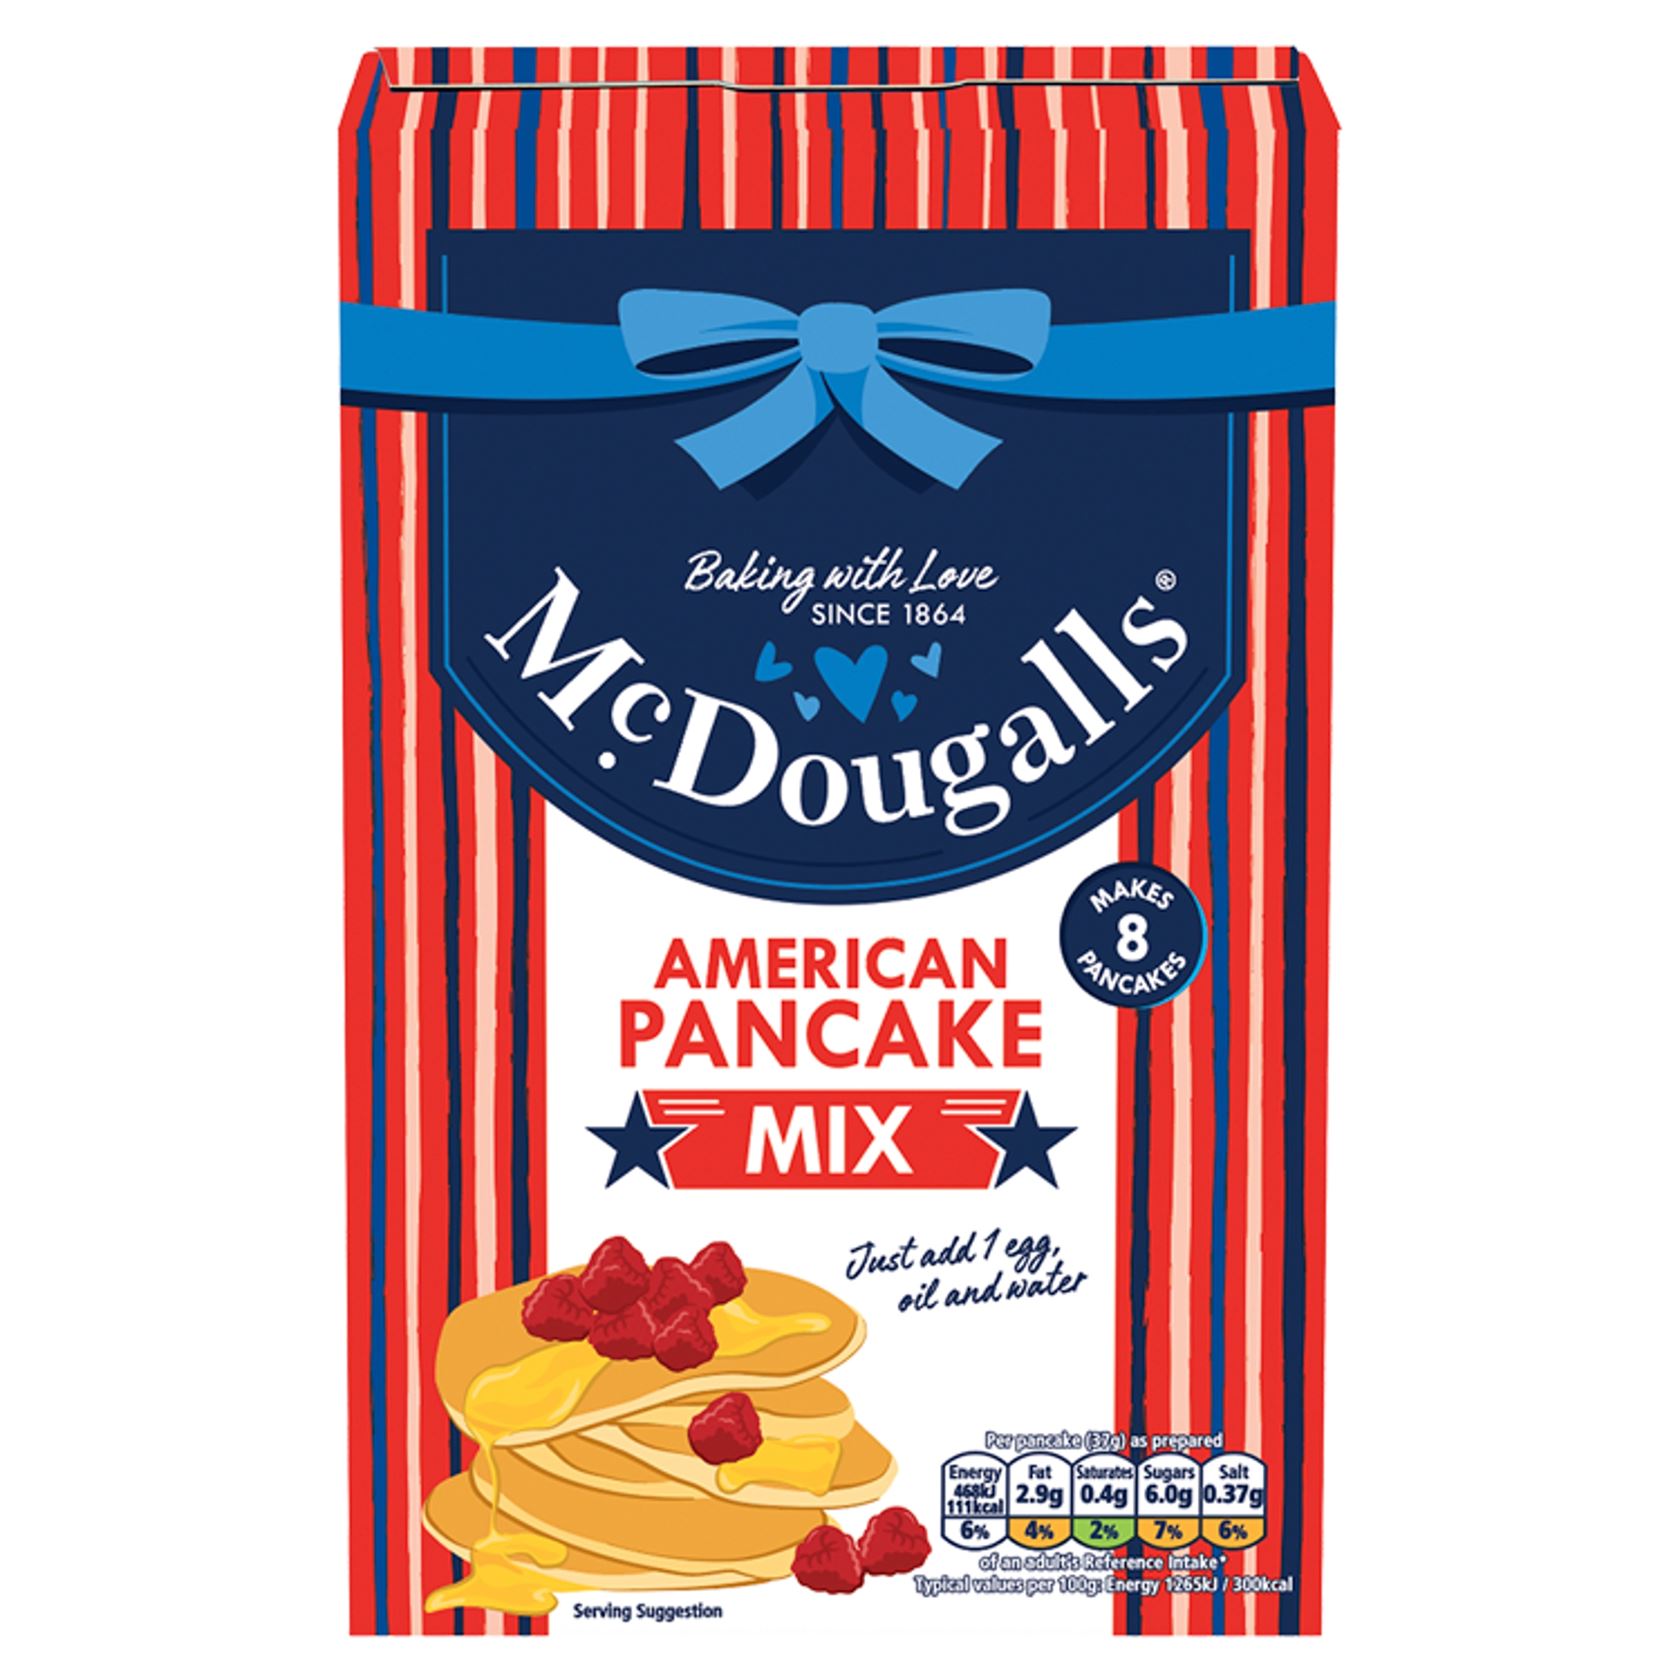 Mcdougalls American Pancake Mix 192g RRP 1.60 CLEARANCE XL 89p or 2 for 1.50